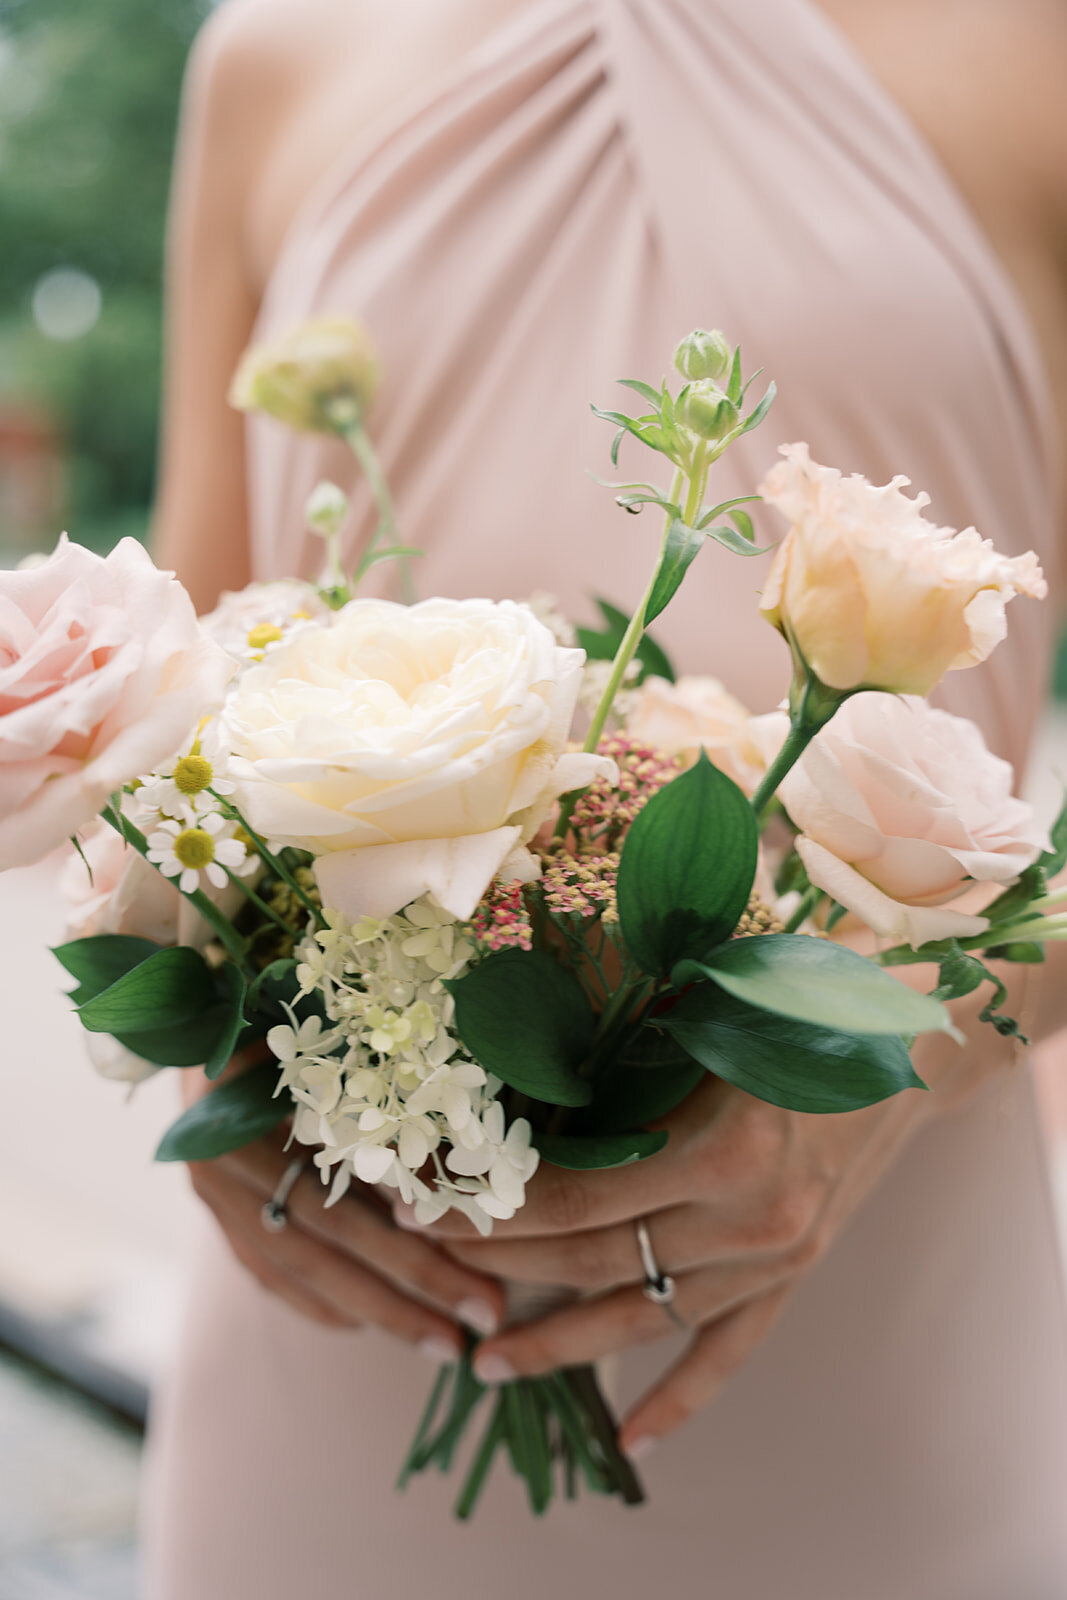 Bridesmaid holding bouquet with white hydrangea, blush lisianthus, cream garden roses, and daisies.